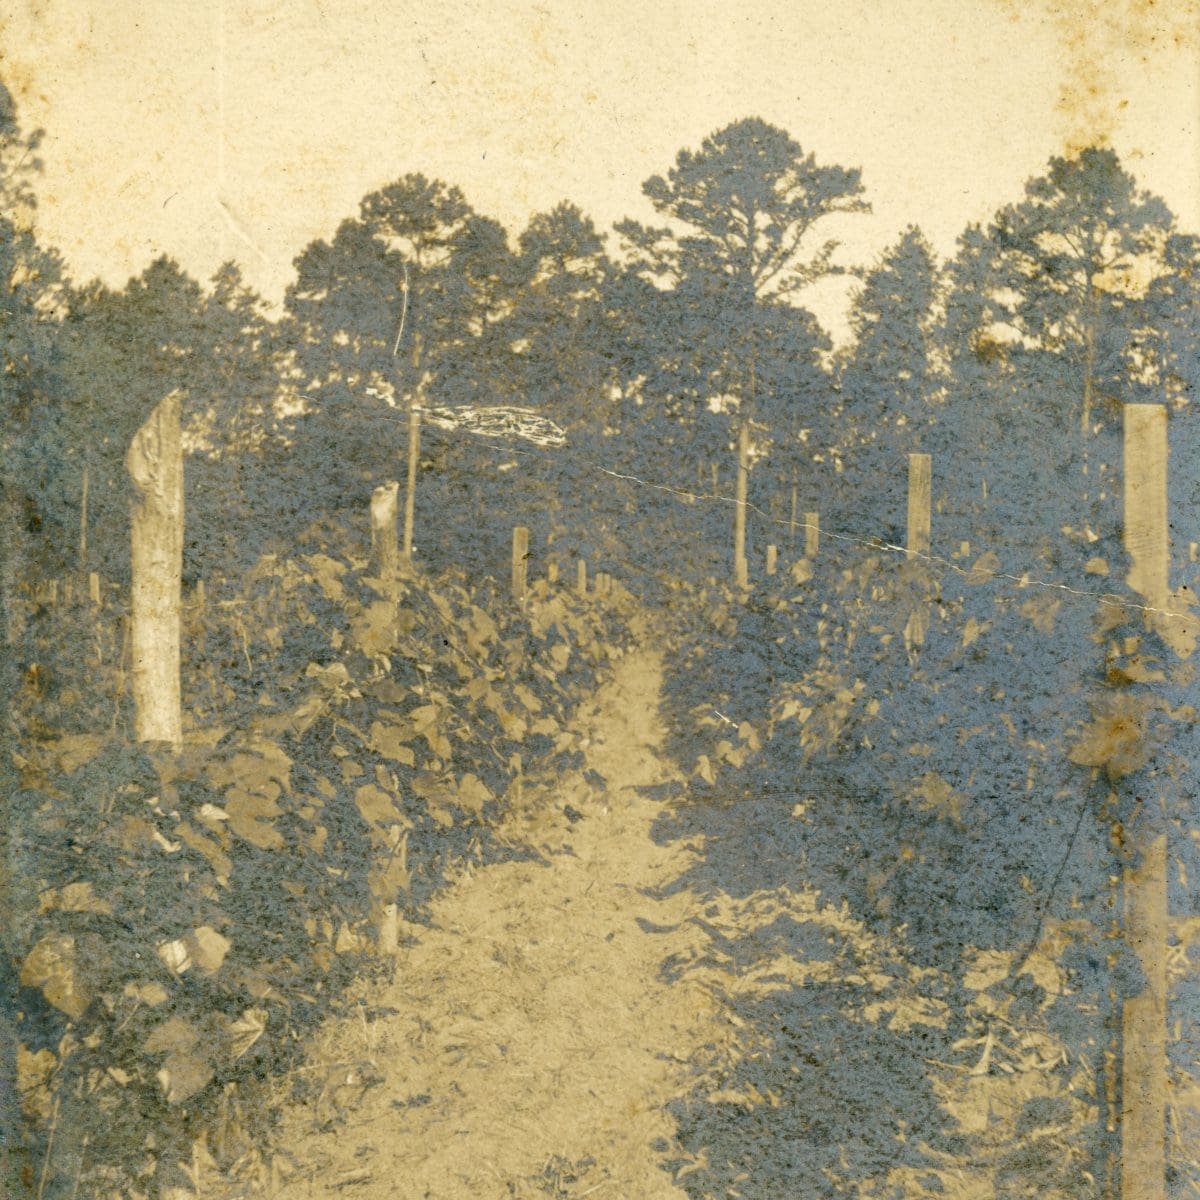 A sepia-colored photo of a vineyard with two rows of plants with support stakes separated by a dirt bath. .  